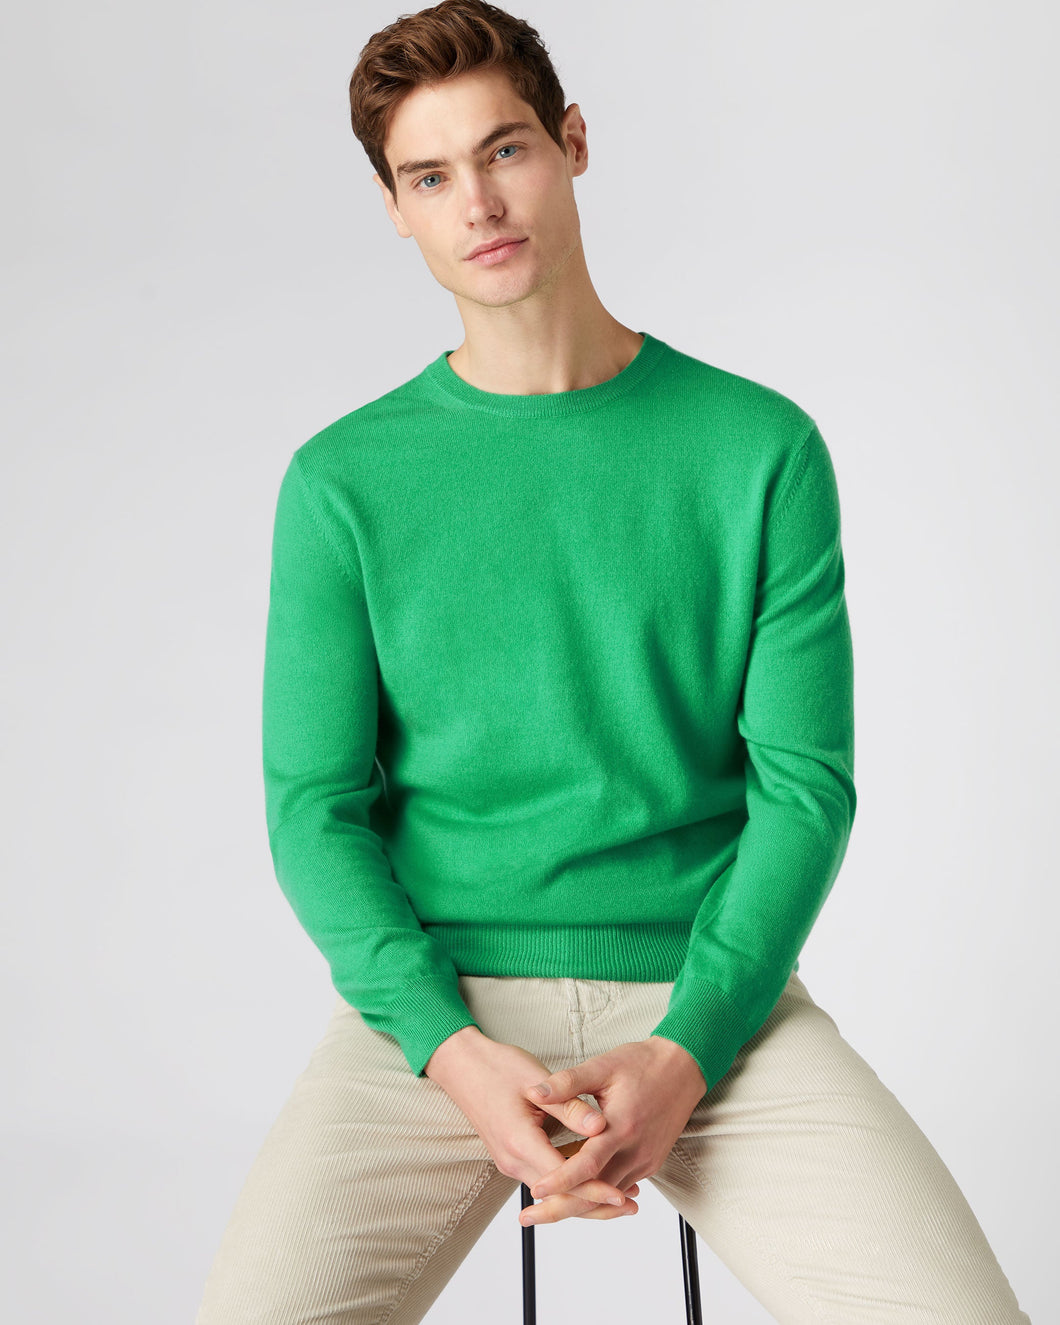 N.Peal Men's The Oxford Round Neck Cashmere Jumper Parrot Green